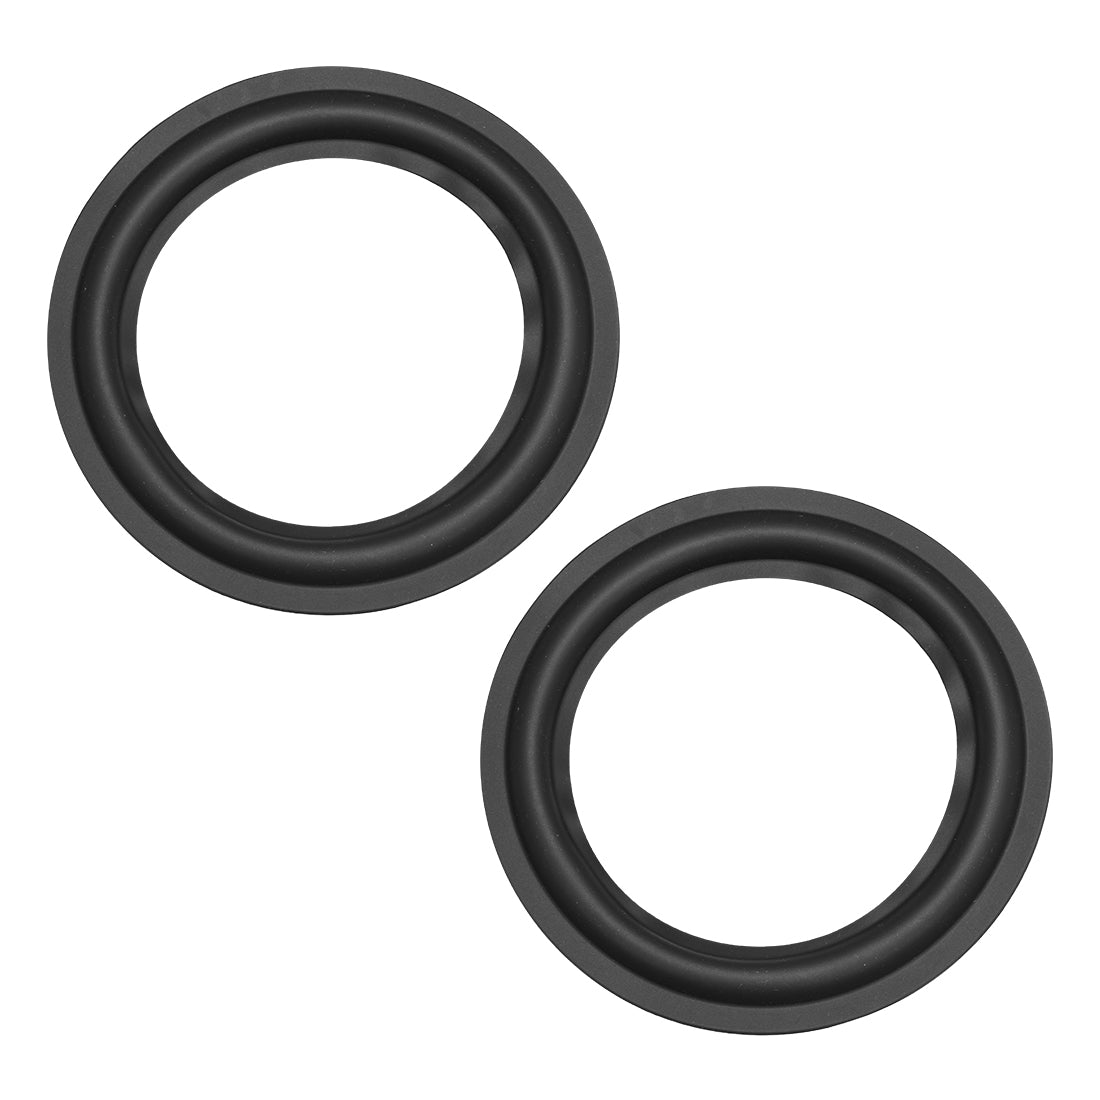 uxcell Uxcell 5" 5inch Rubber Edge Surround Rings Replacement Part for Repair or DIY 2pcs